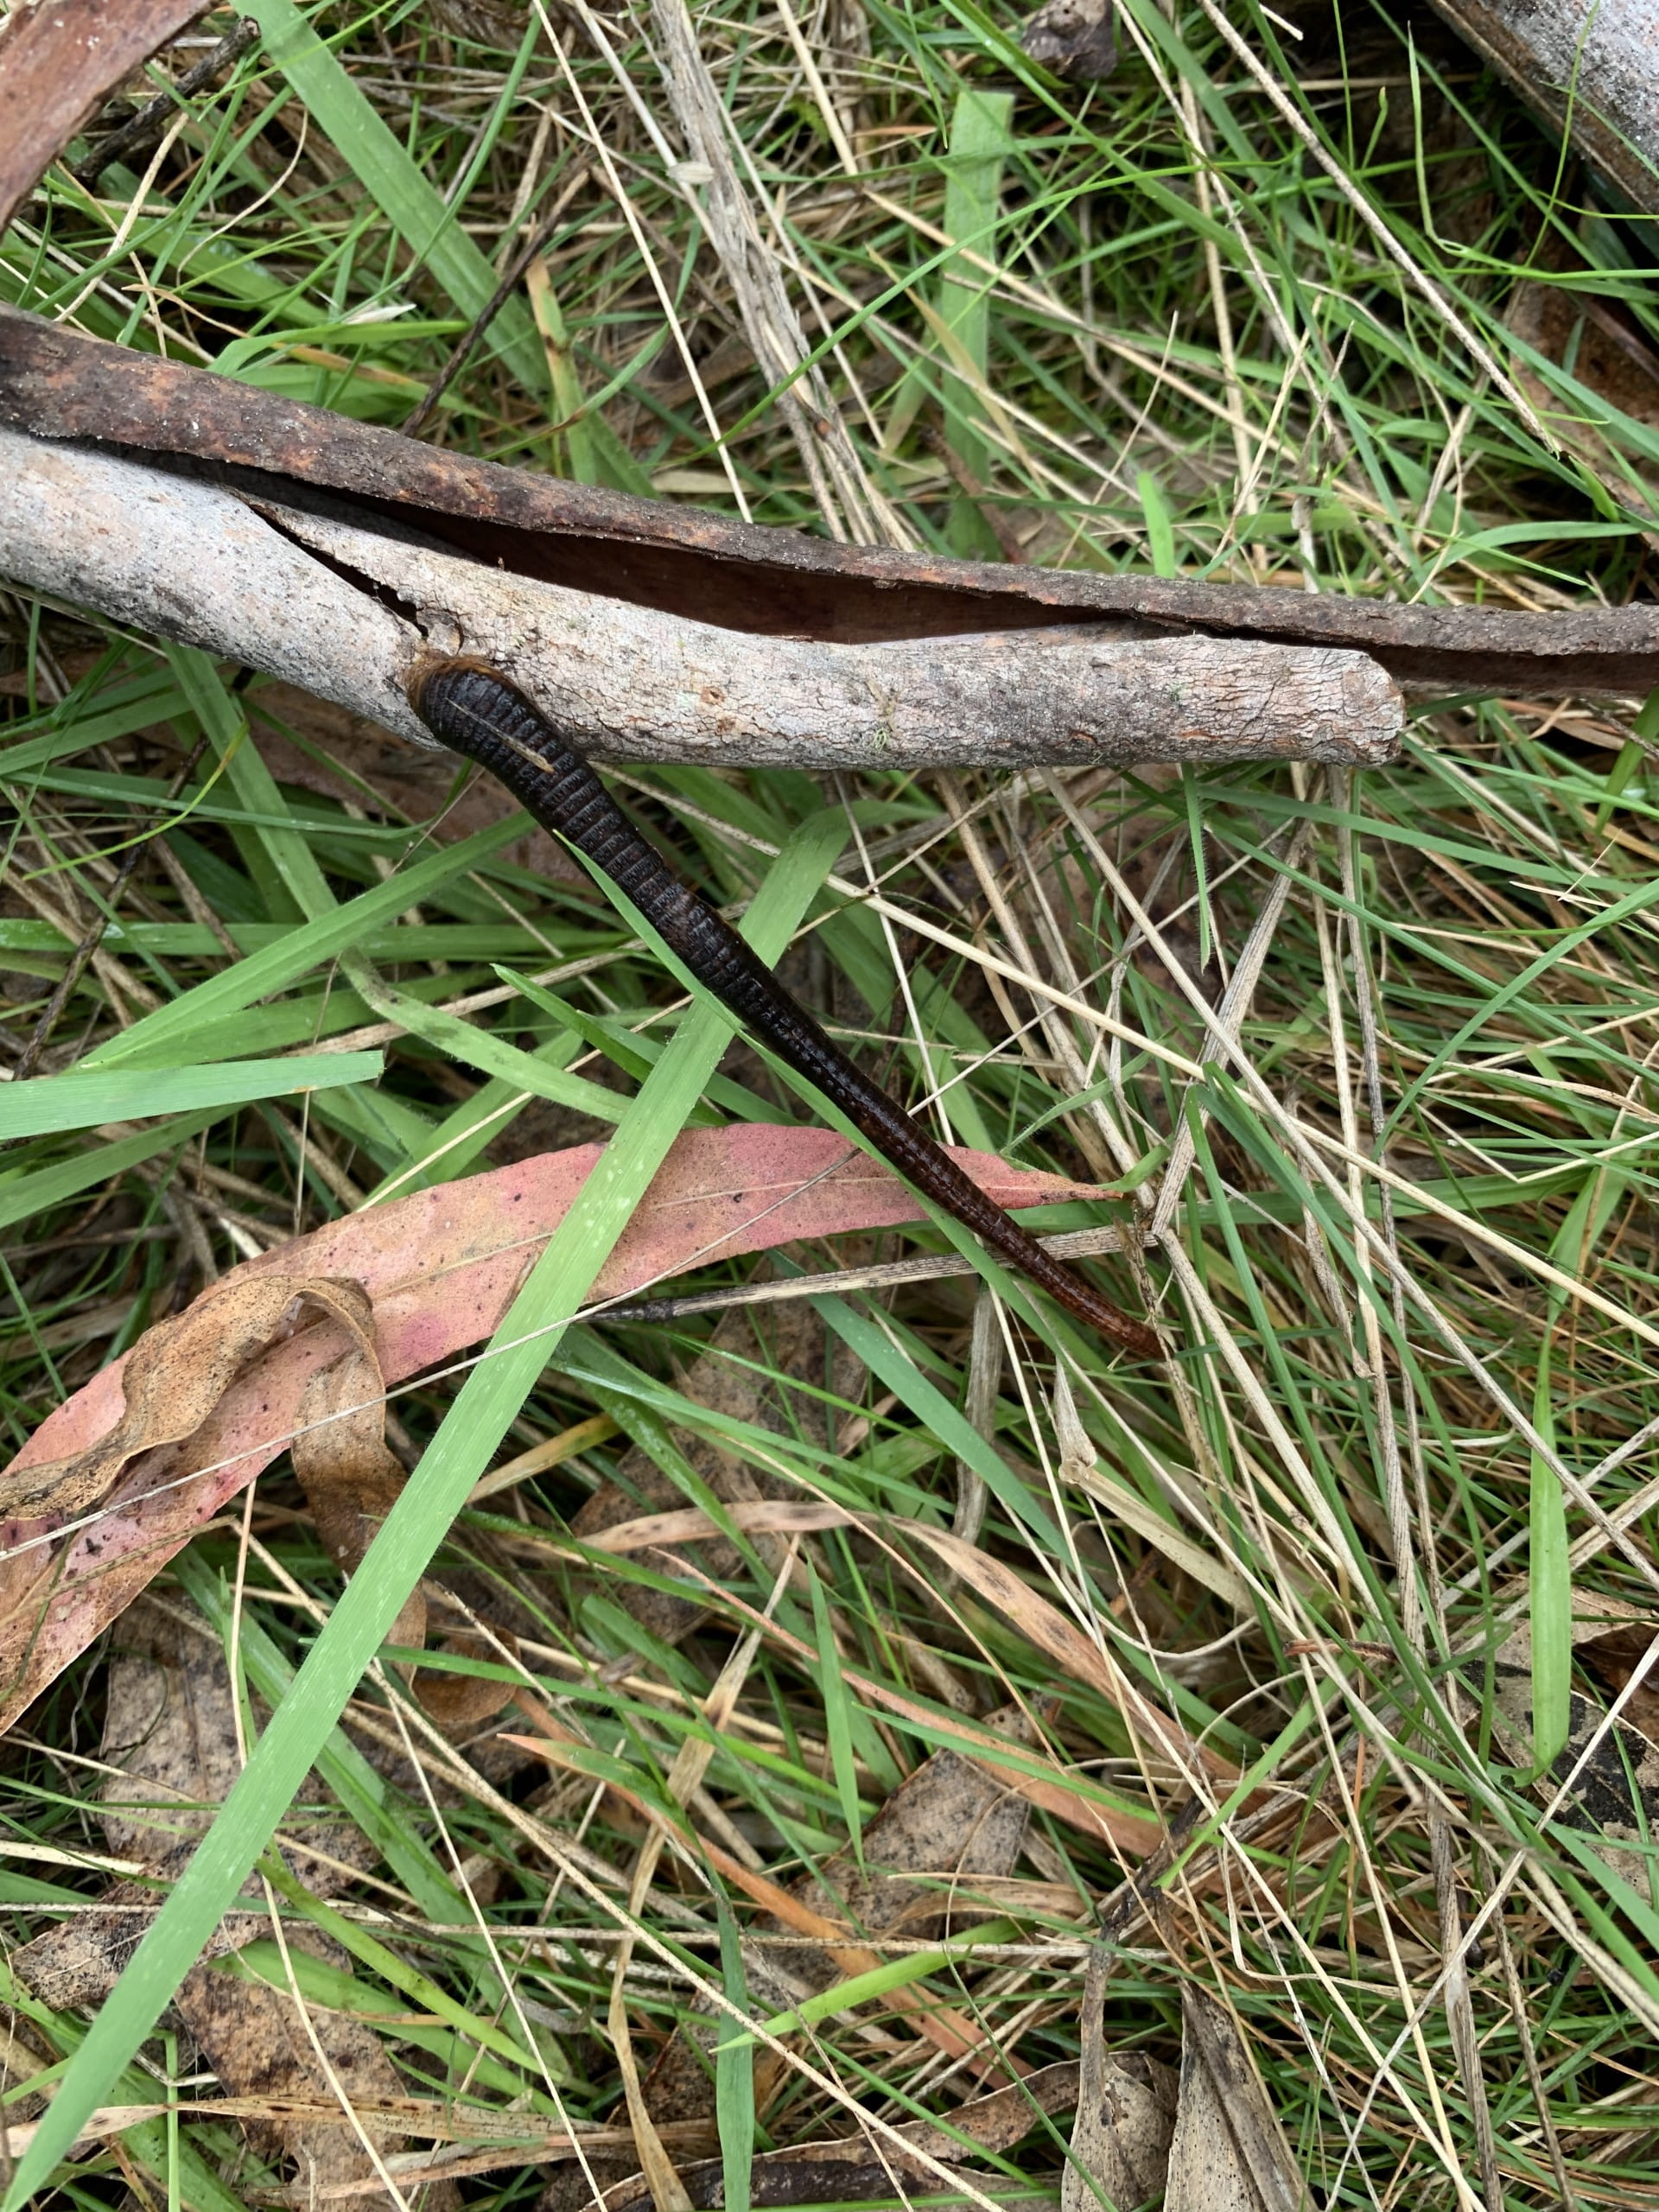 A black leech is attached to a dead leaf